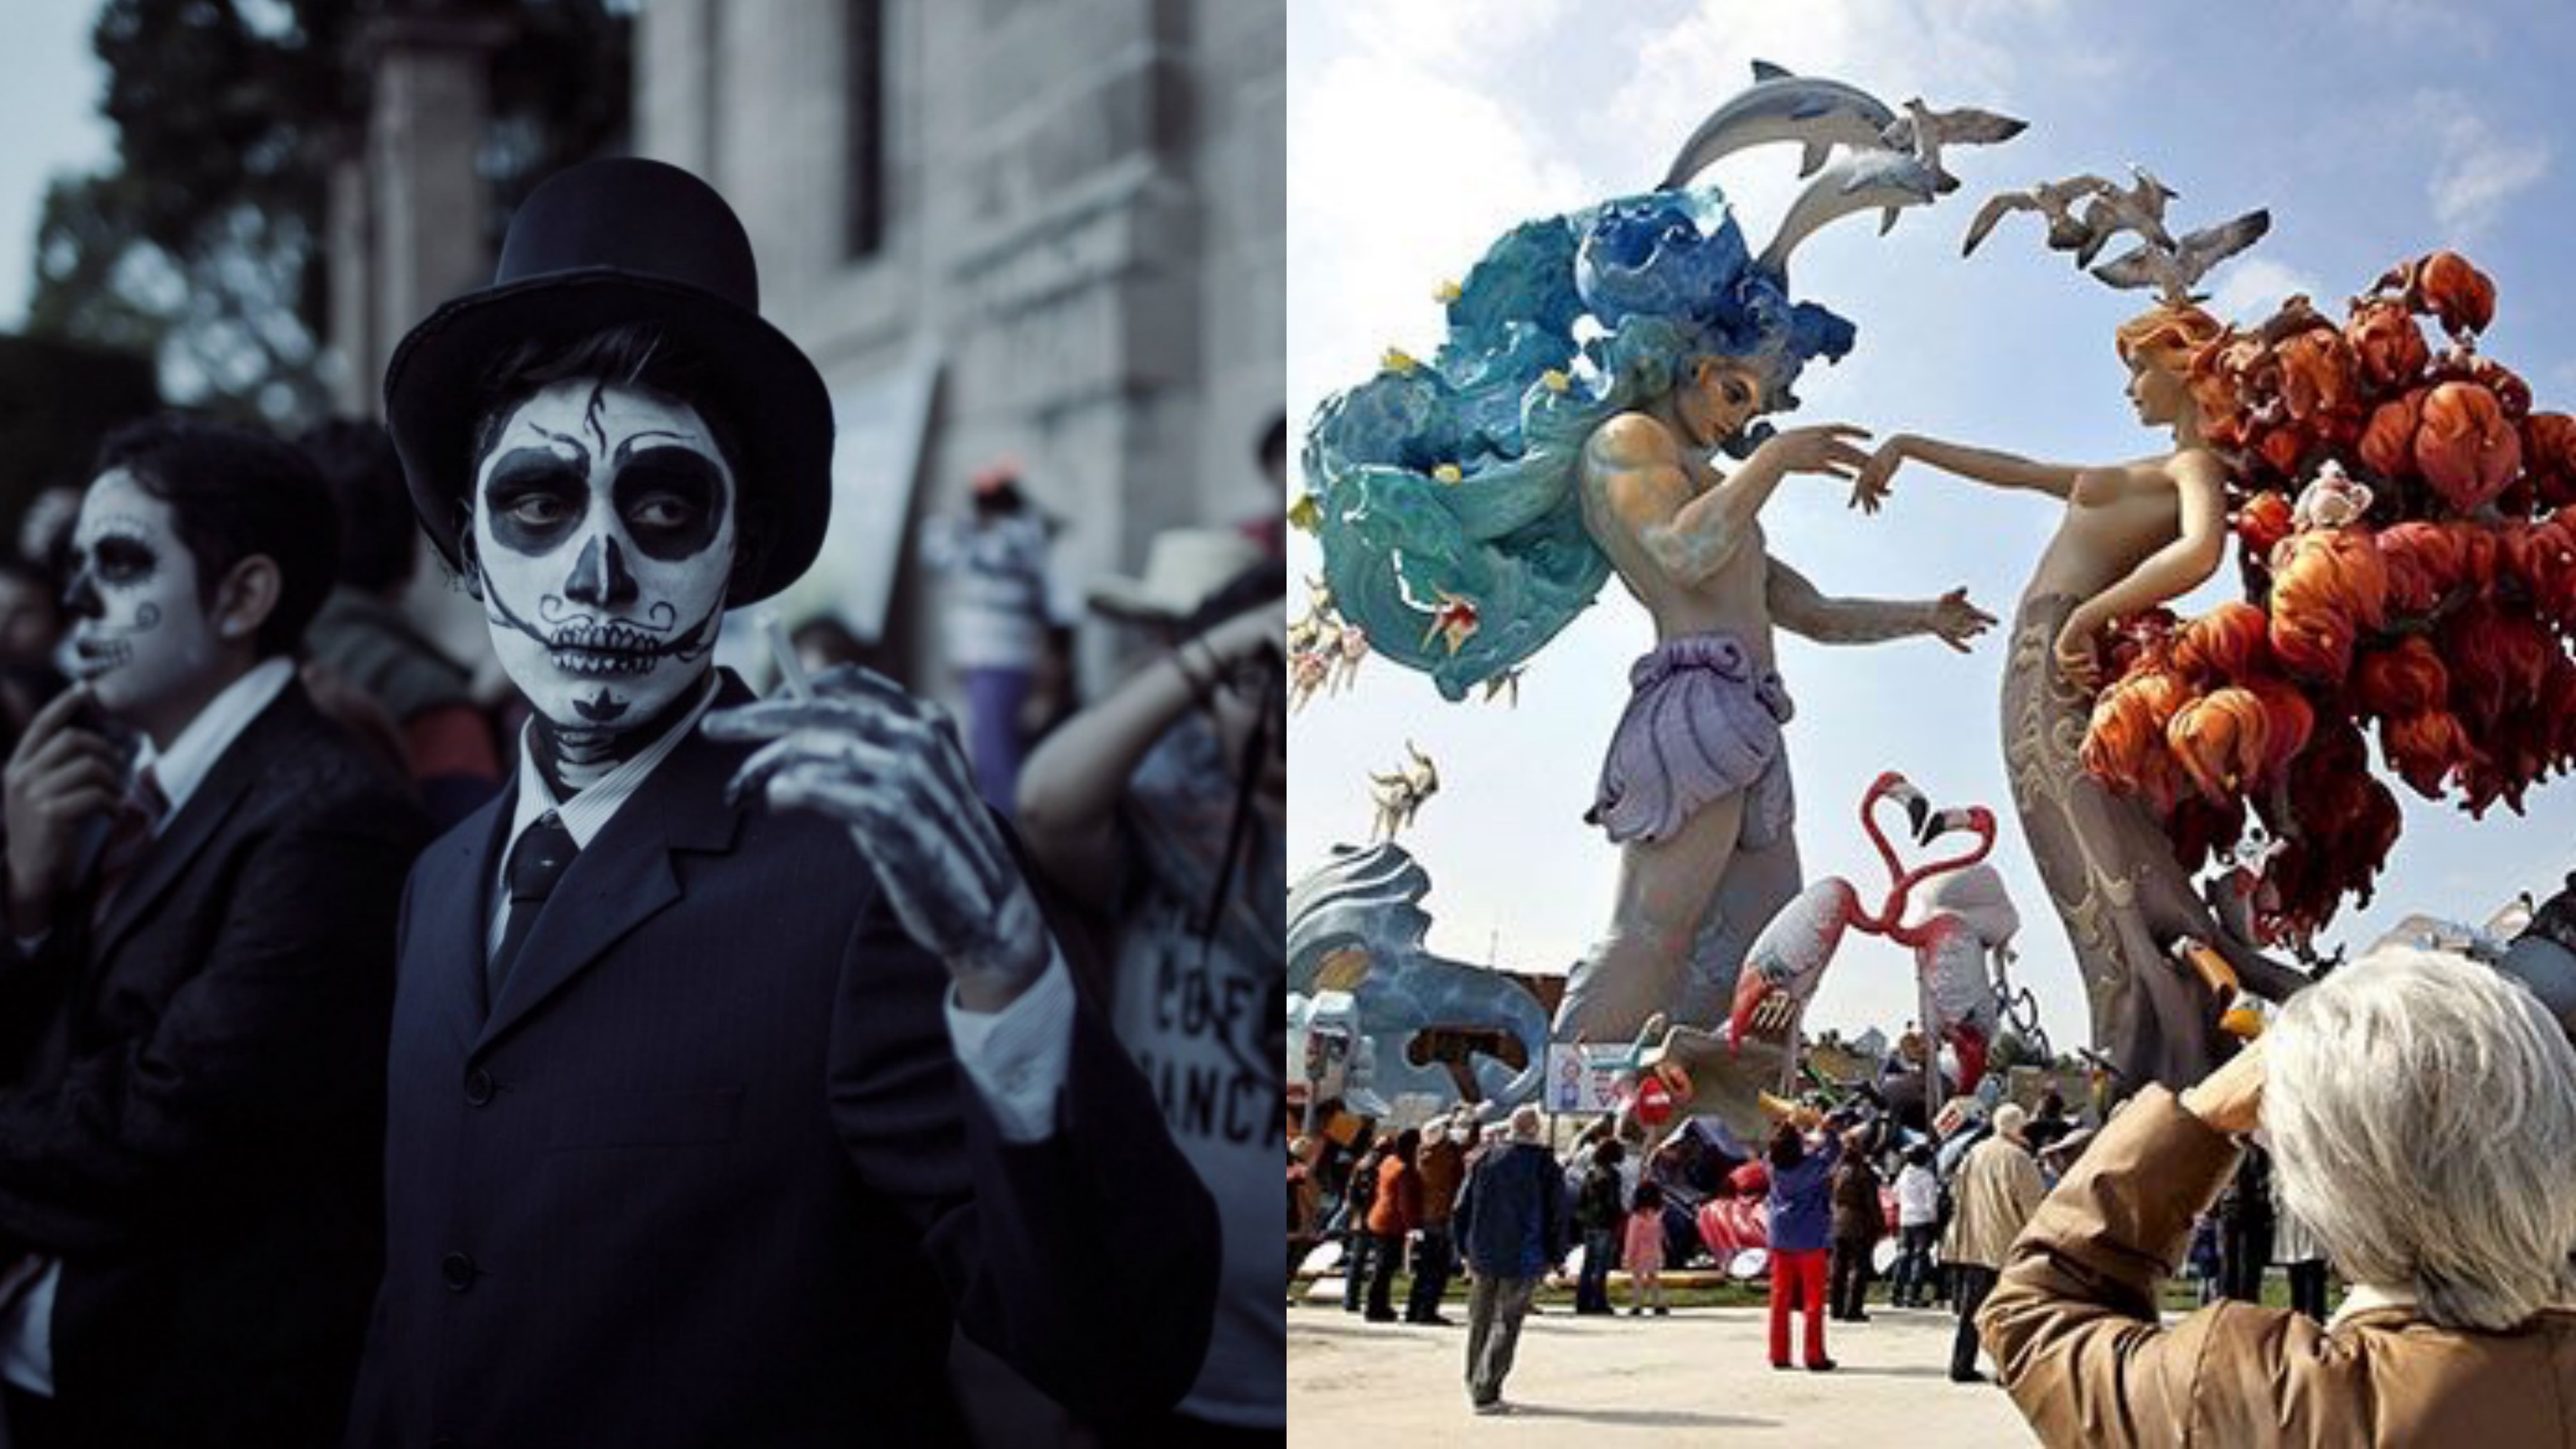 5 Traditional Festivals In Europe That Will Add A Kick To Your EuroTrip